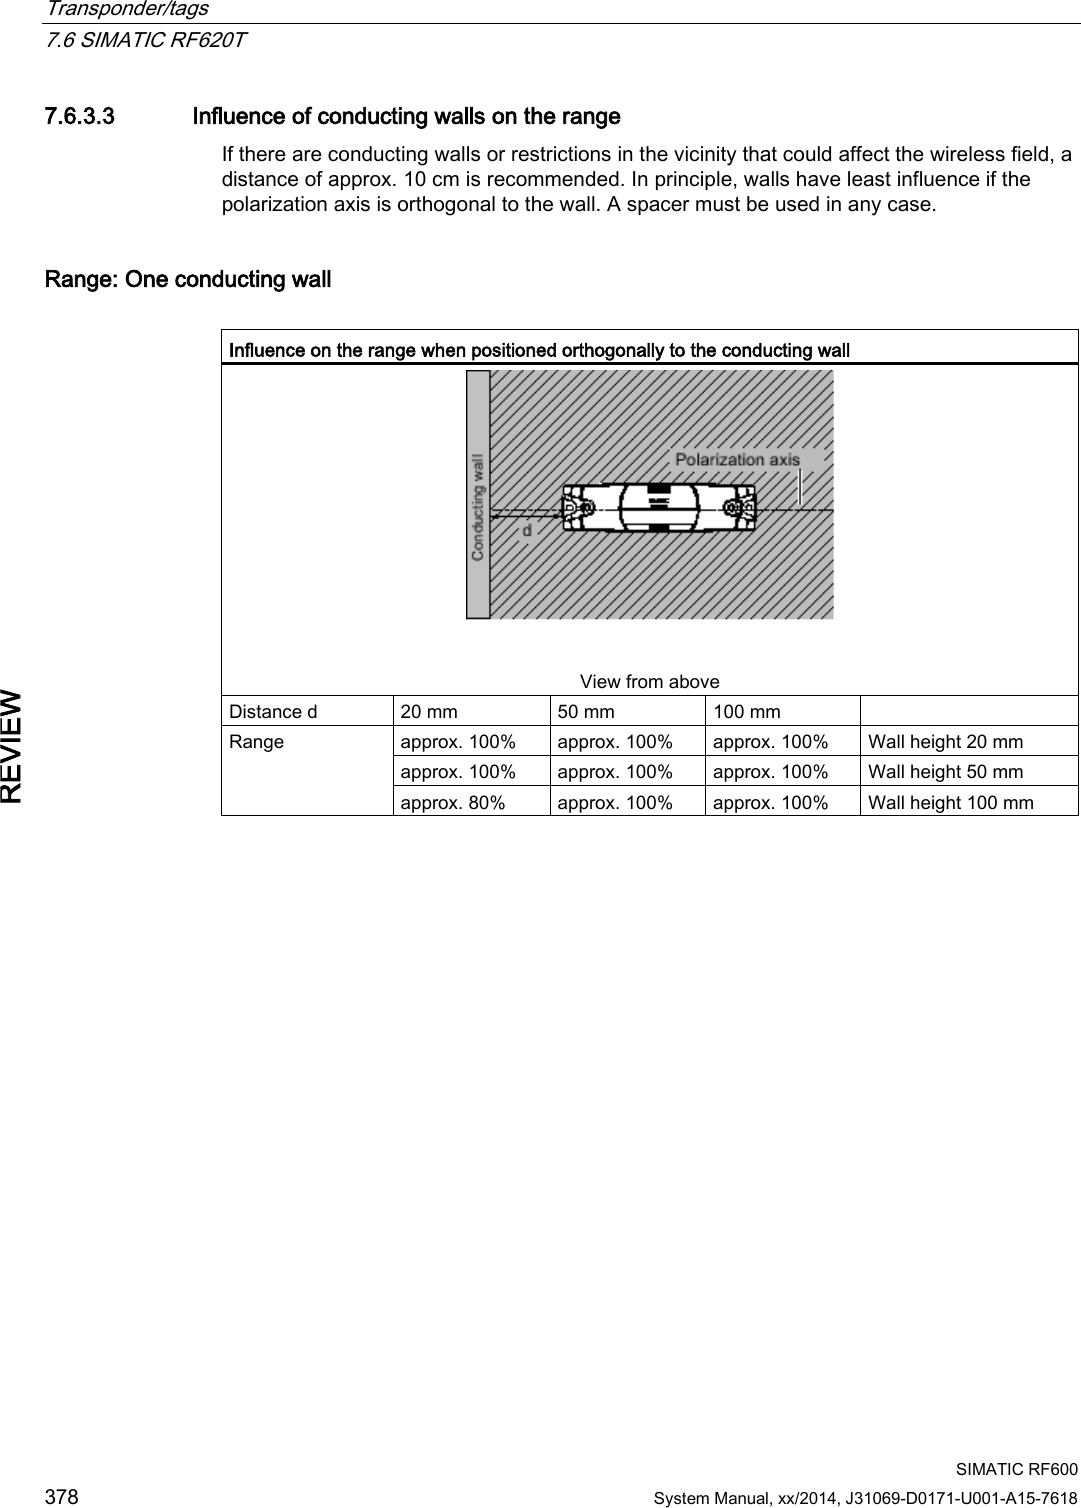 Transponder/tags   7.6 SIMATIC RF620T  SIMATIC RF600 378 System Manual, xx/2014, J31069-D0171-U001-A15-7618 REVIEW 7.6.3.3 Influence of conducting walls on the range If there are conducting walls or restrictions in the vicinity that could affect the wireless field, a distance of approx. 10 cm is recommended. In principle, walls have least influence if the polarization axis is orthogonal to the wall. A spacer must be used in any case. Range: One conducting wall  Influence on the range when positioned orthogonally to the conducting wall   View from above  Distance d 20 mm 50 mm 100 mm  Range approx. 100% approx. 100% approx. 100% Wall height 20 mm approx. 100% approx. 100% approx. 100% Wall height 50 mm approx. 80% approx. 100% approx. 100% Wall height 100 mm  